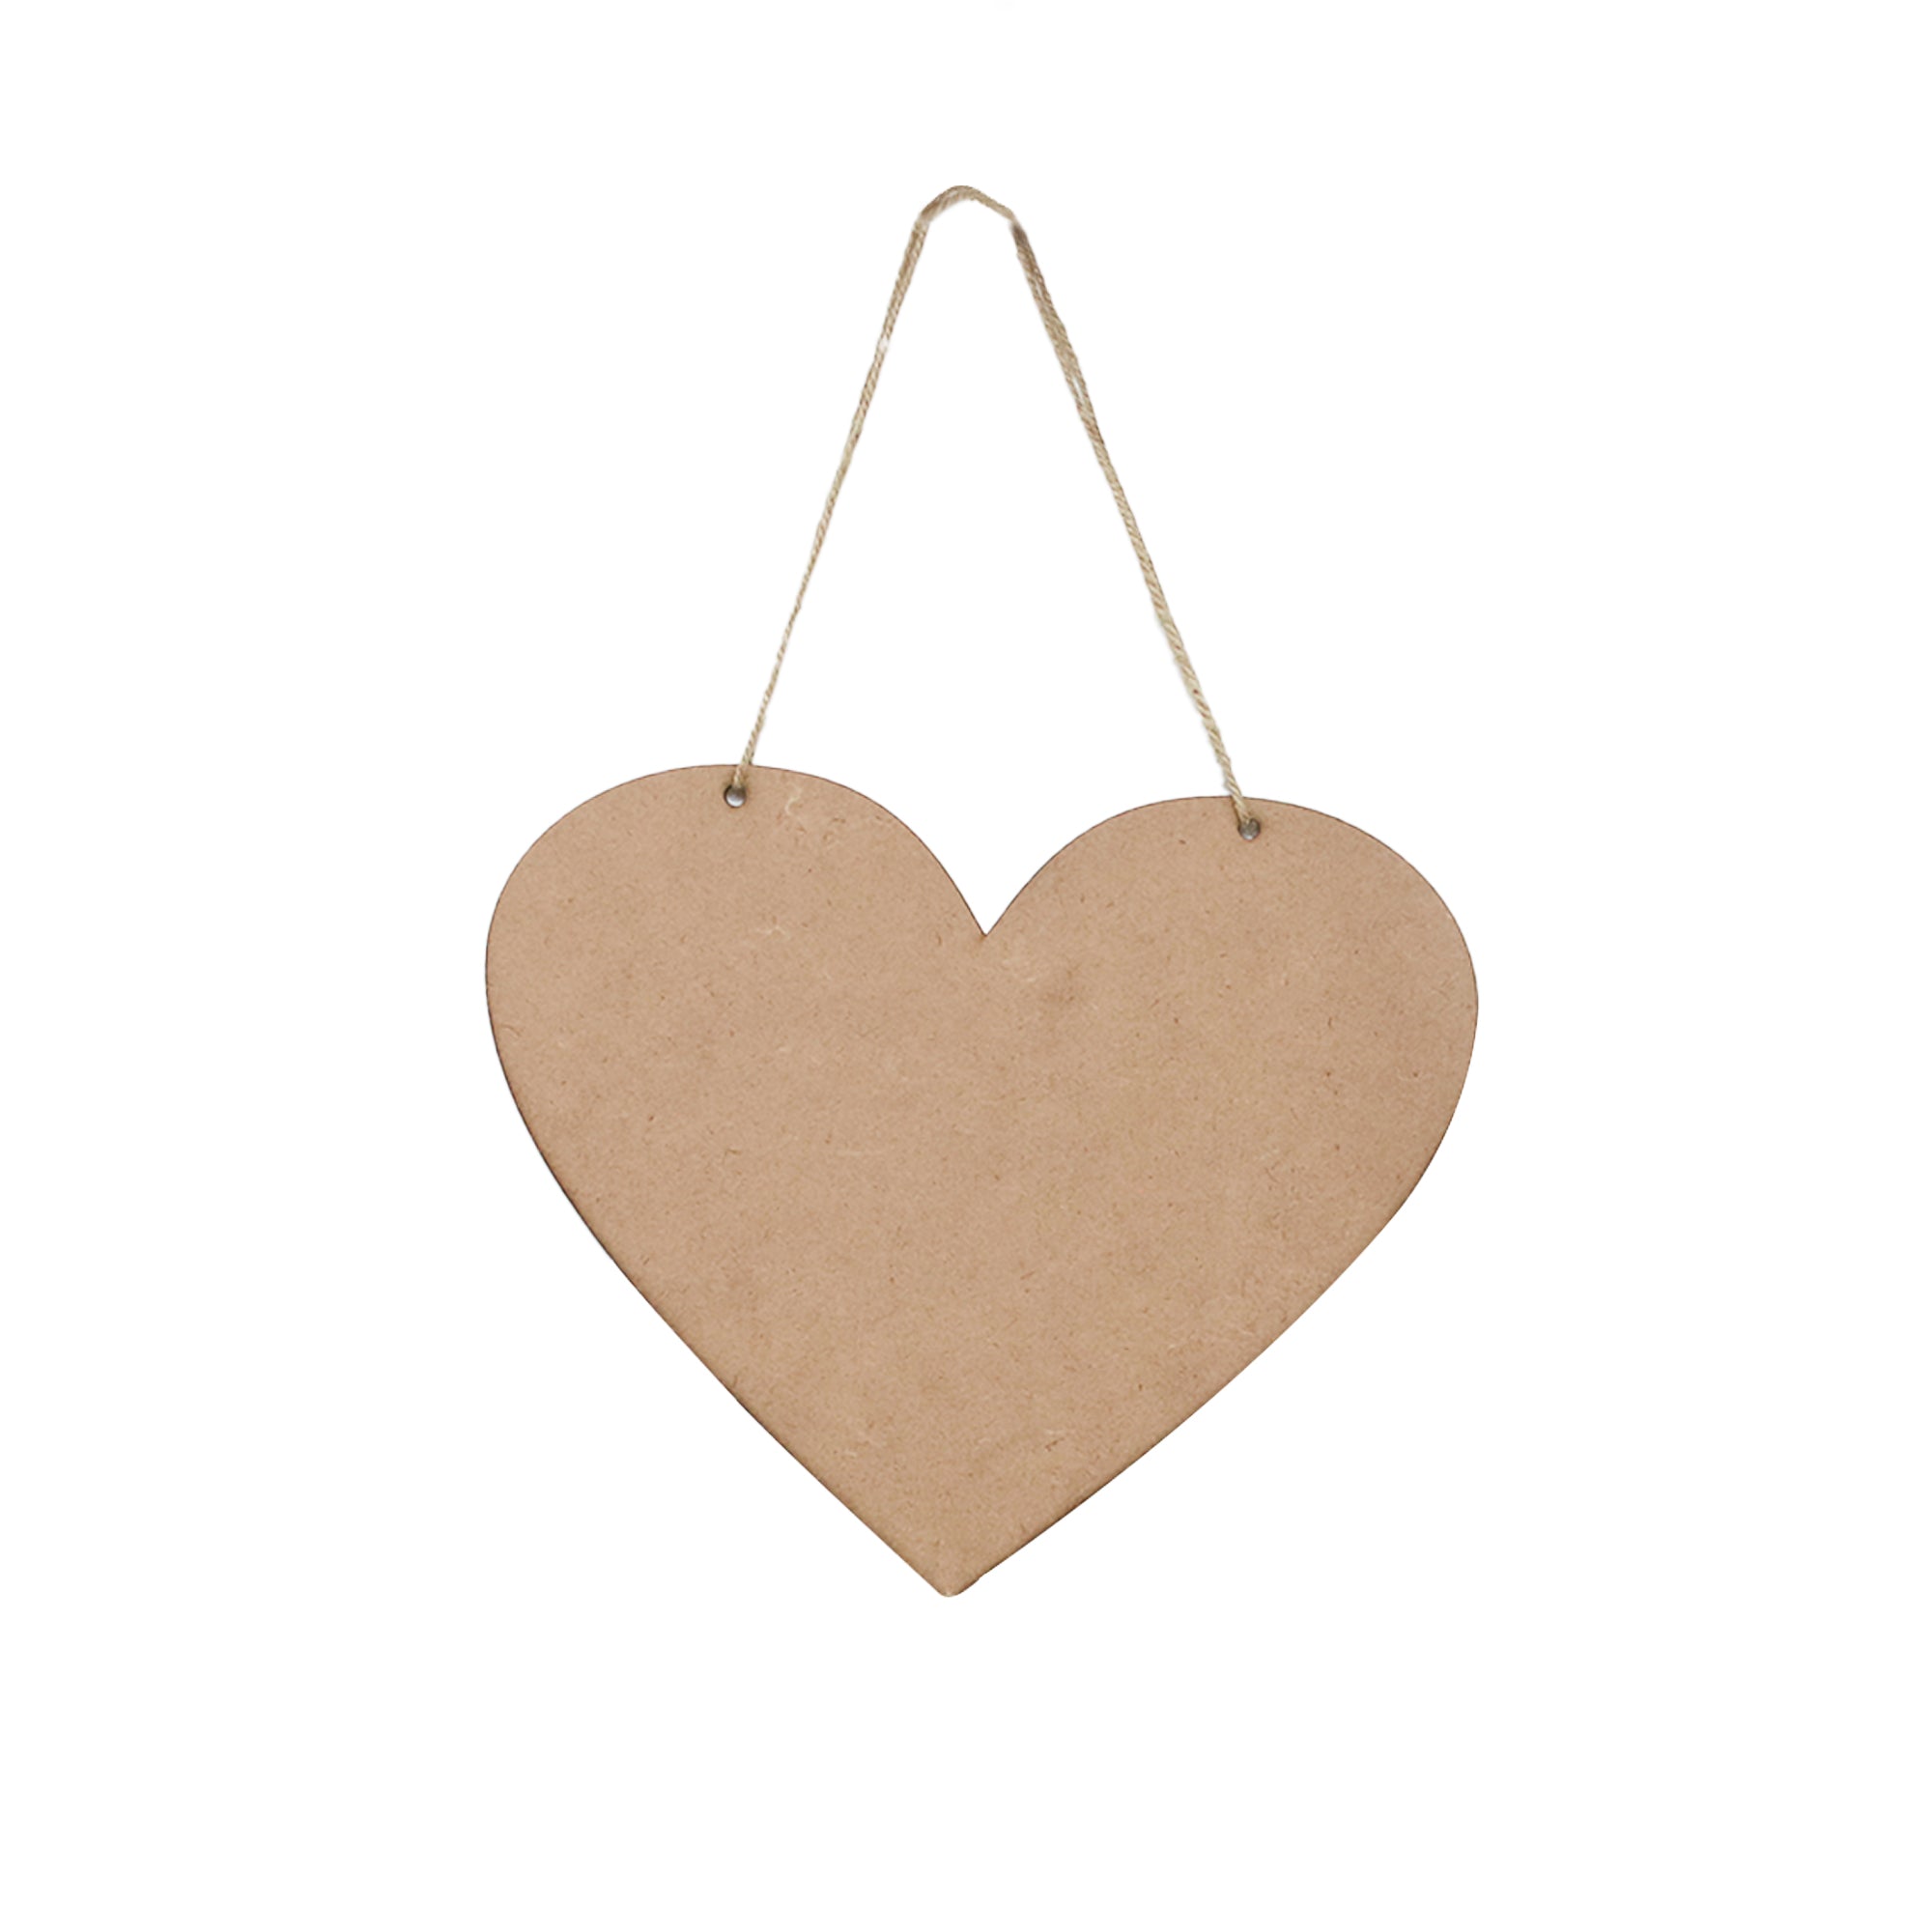 Mdf Hanging Heart With Jute Twine 8 X 8Inch 5.5Mm Thick 1Pc Pb Lb